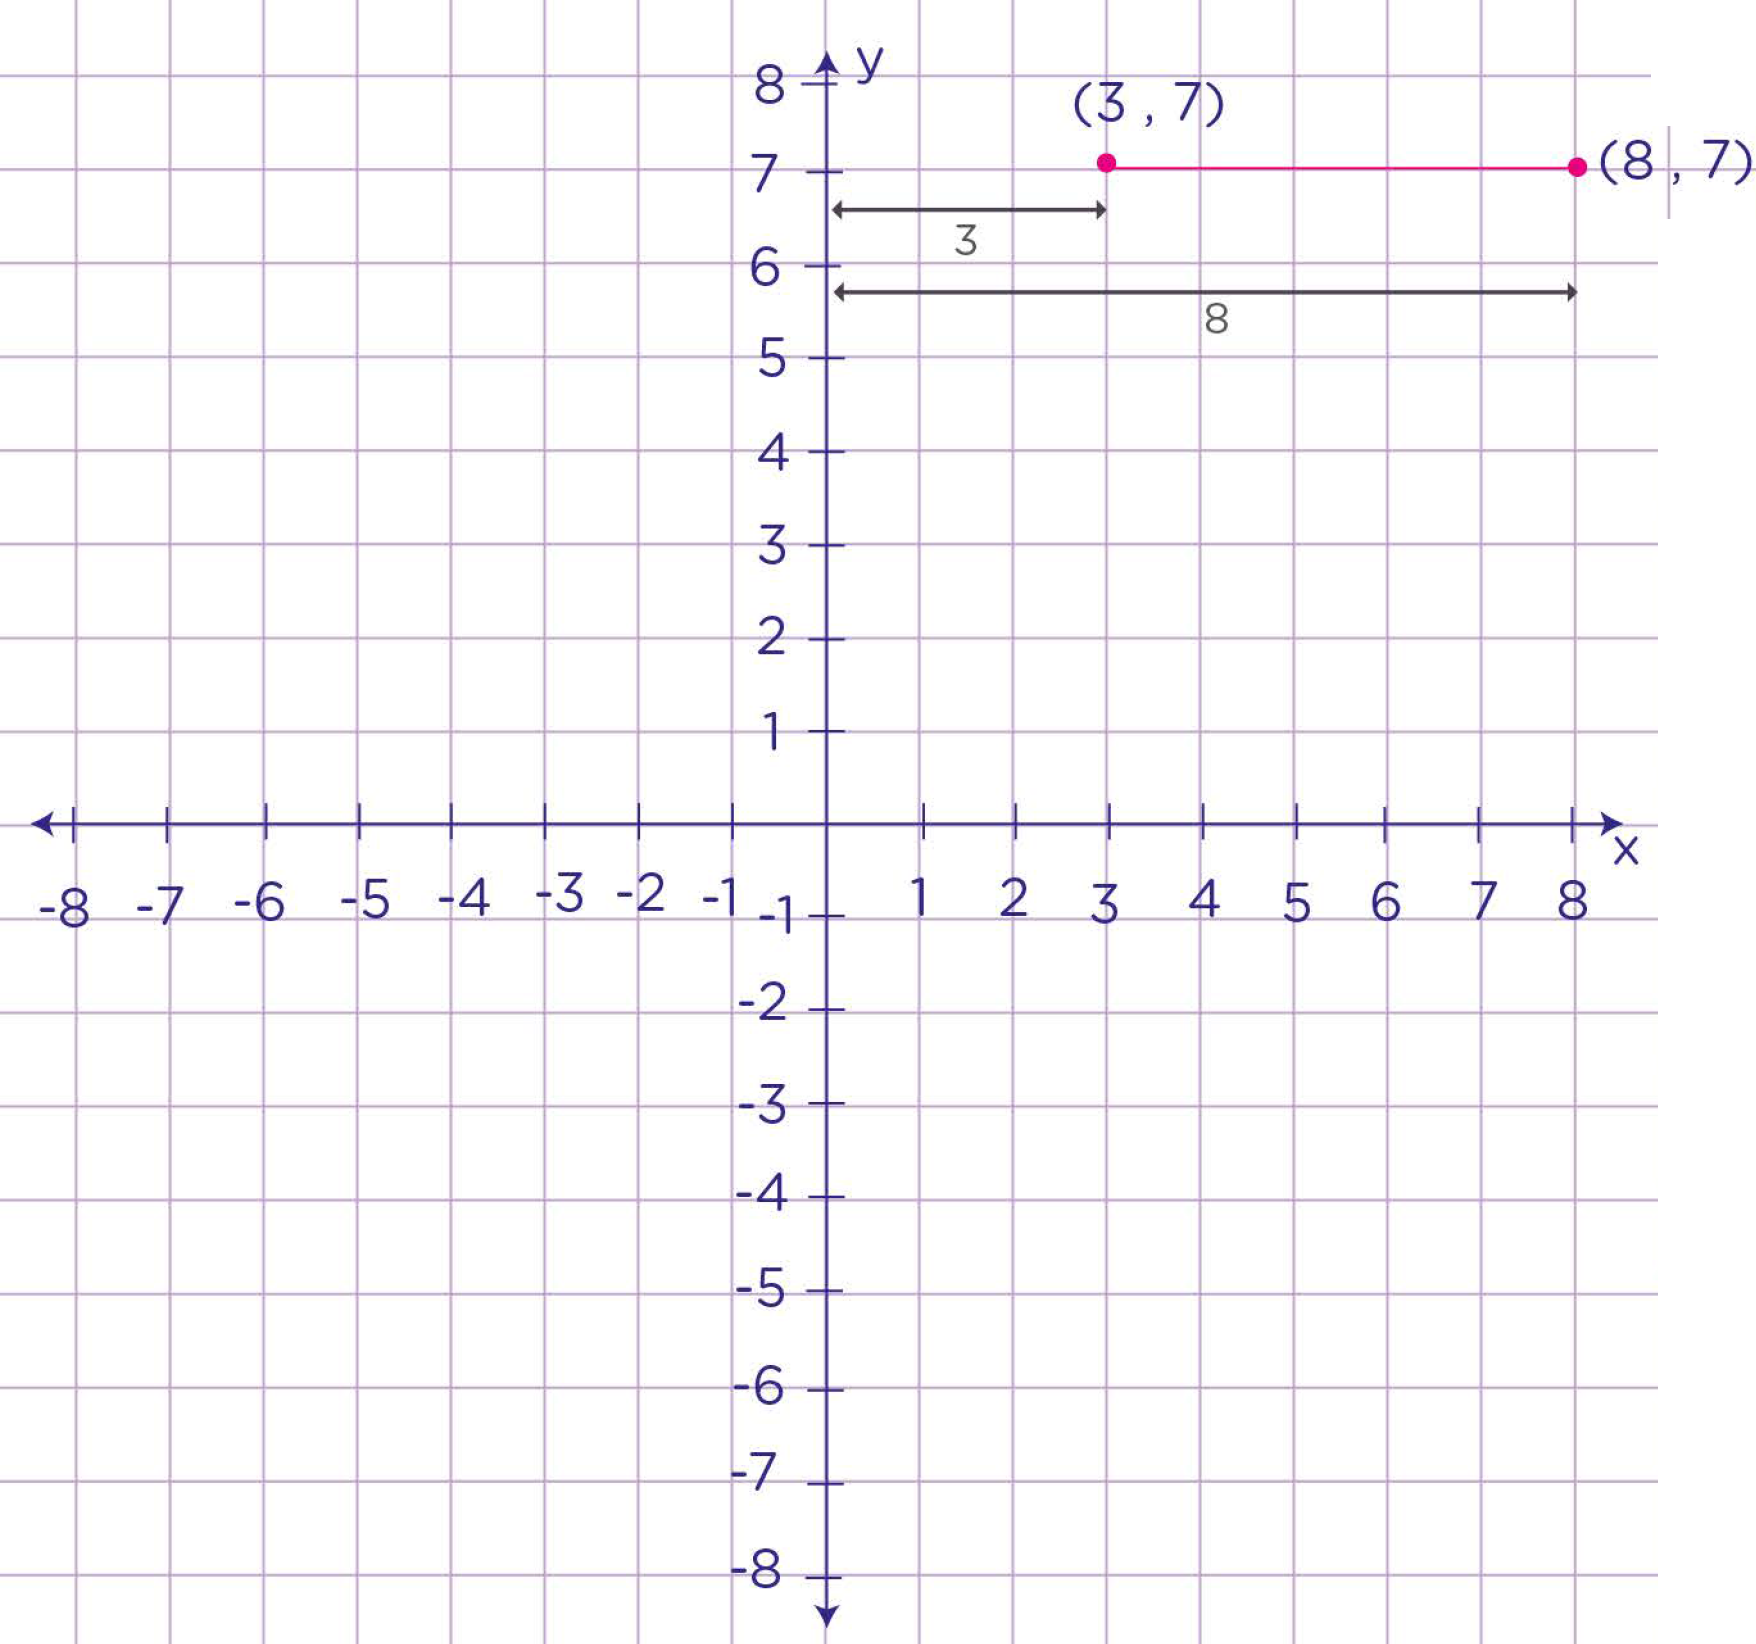 An example of how to find the distance between two points on a coordinate plane